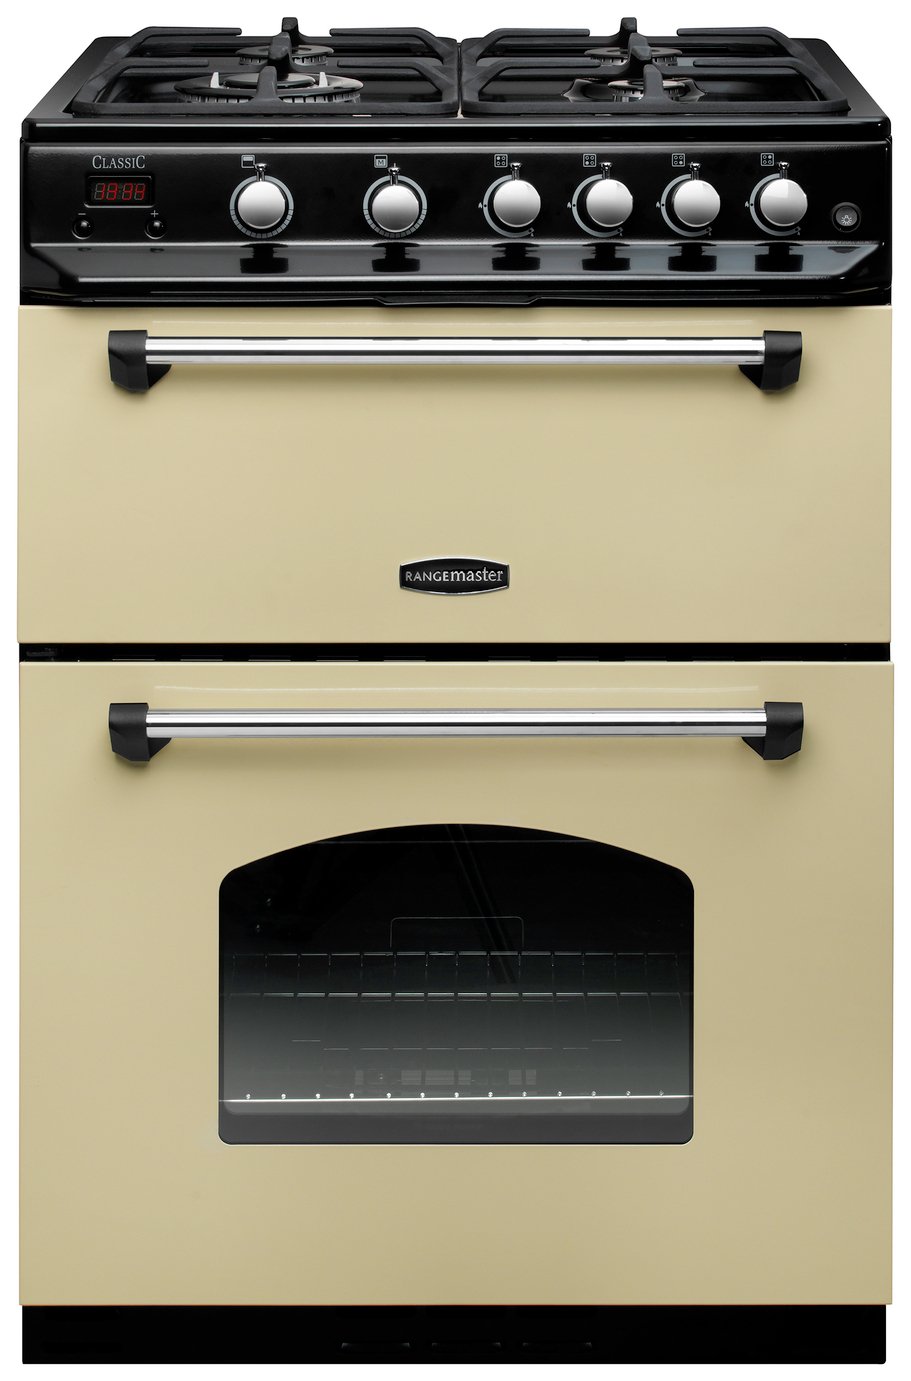 Rangemaster Classic CLAS60NGFCR/C Gas Cooker review